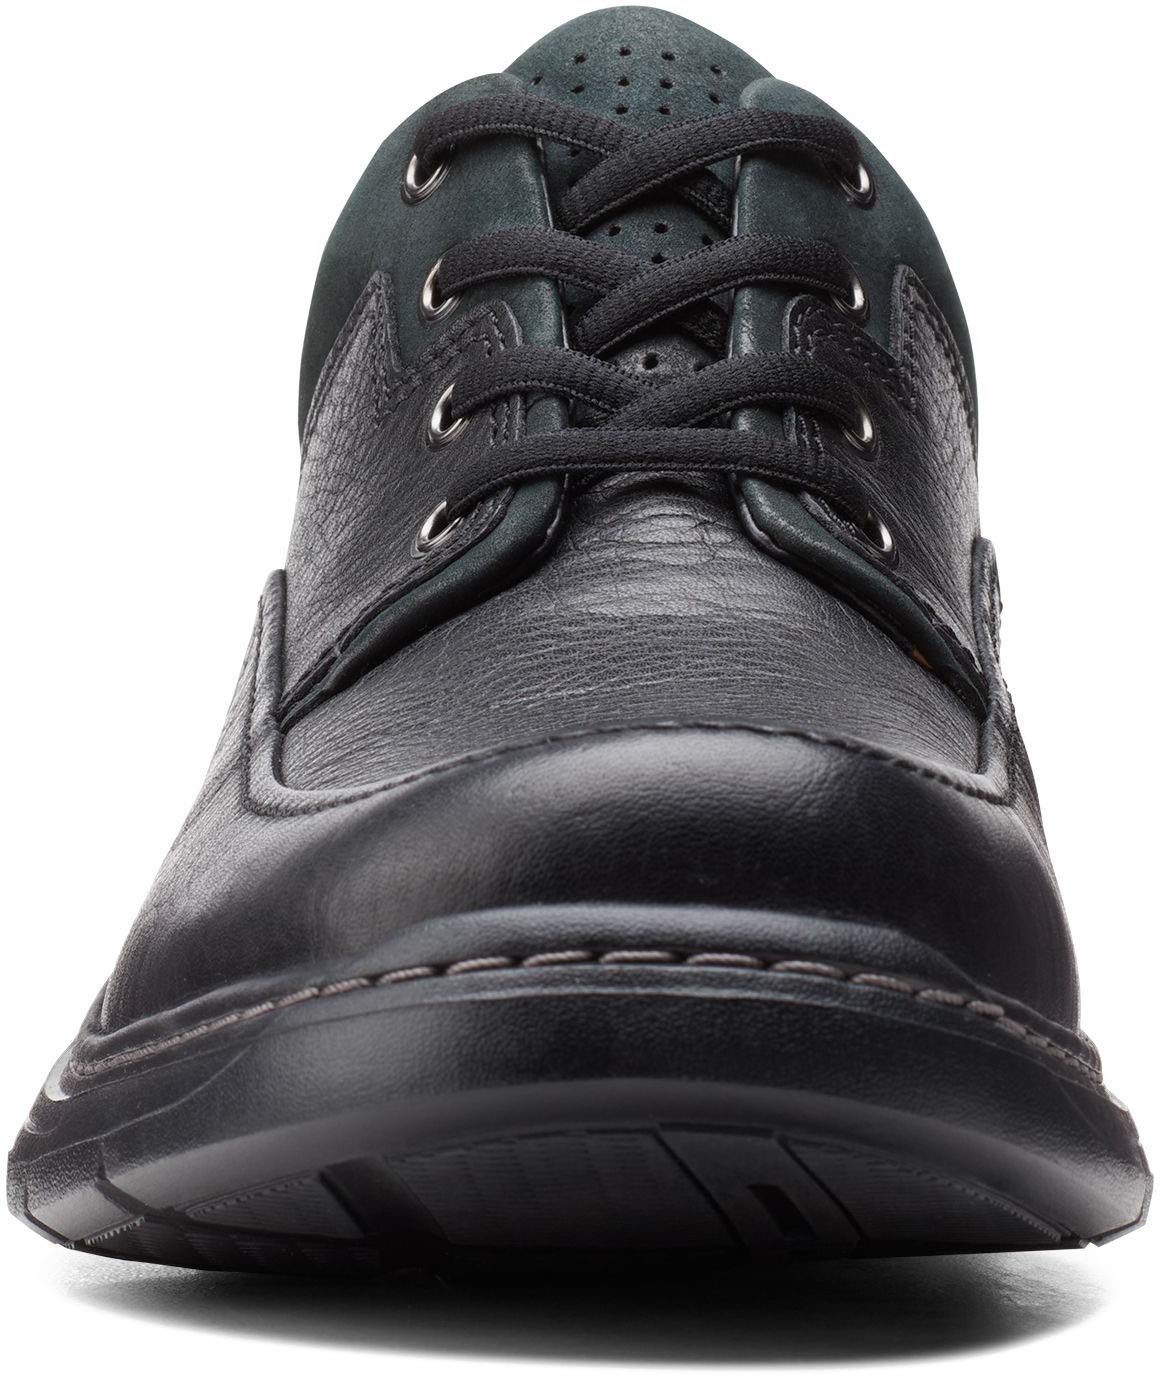 Clarks Un Brawley Lace Black Tumbled Leather  Extra Wide 